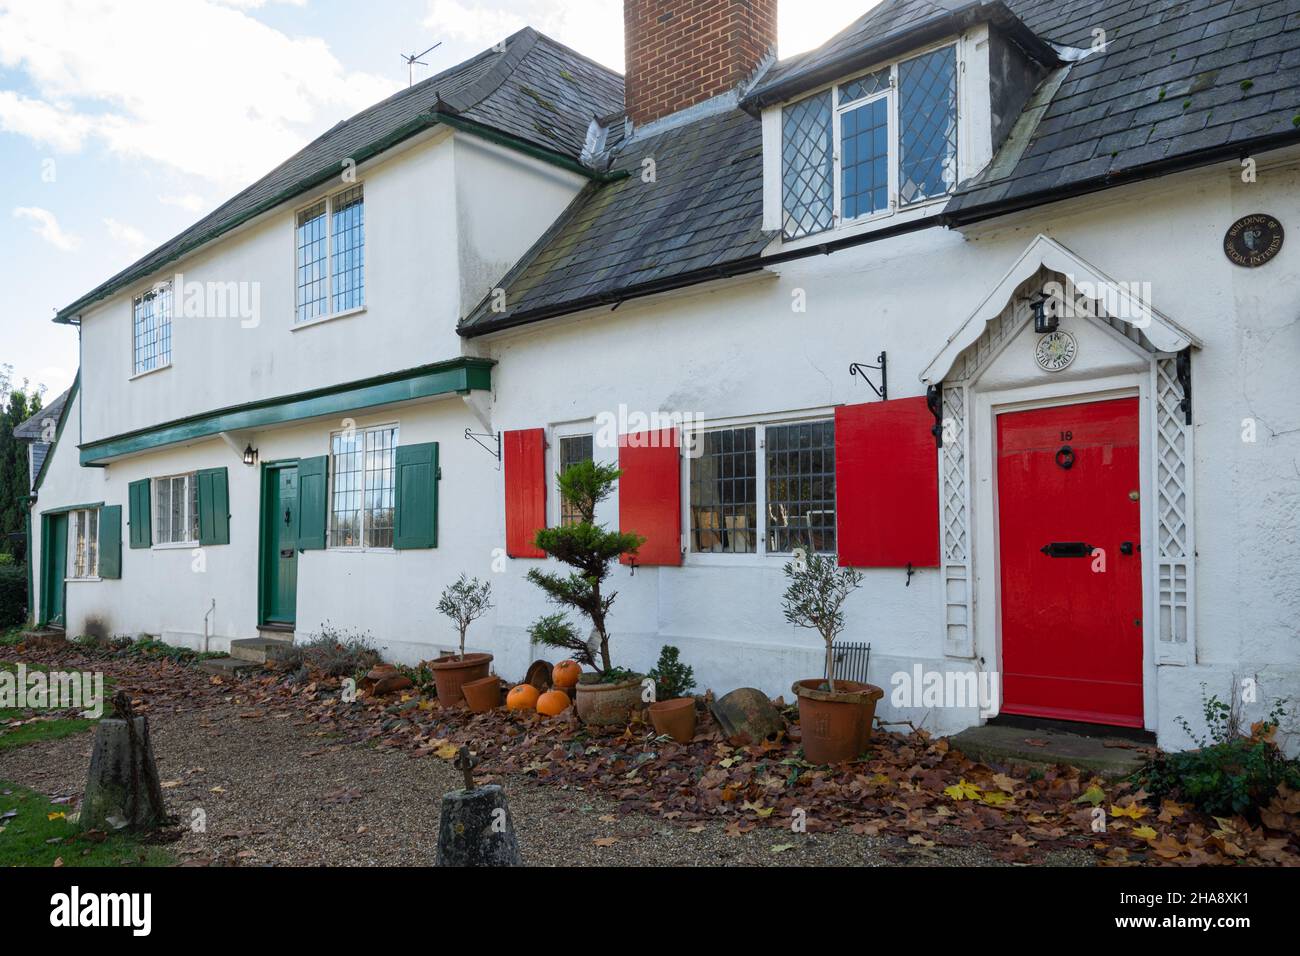 16 and 18, The Street, Shalford, Surrey, England, UK. Grade II Listed Building, 17th century cottages with colourful doors and shutters in the village Stock Photo